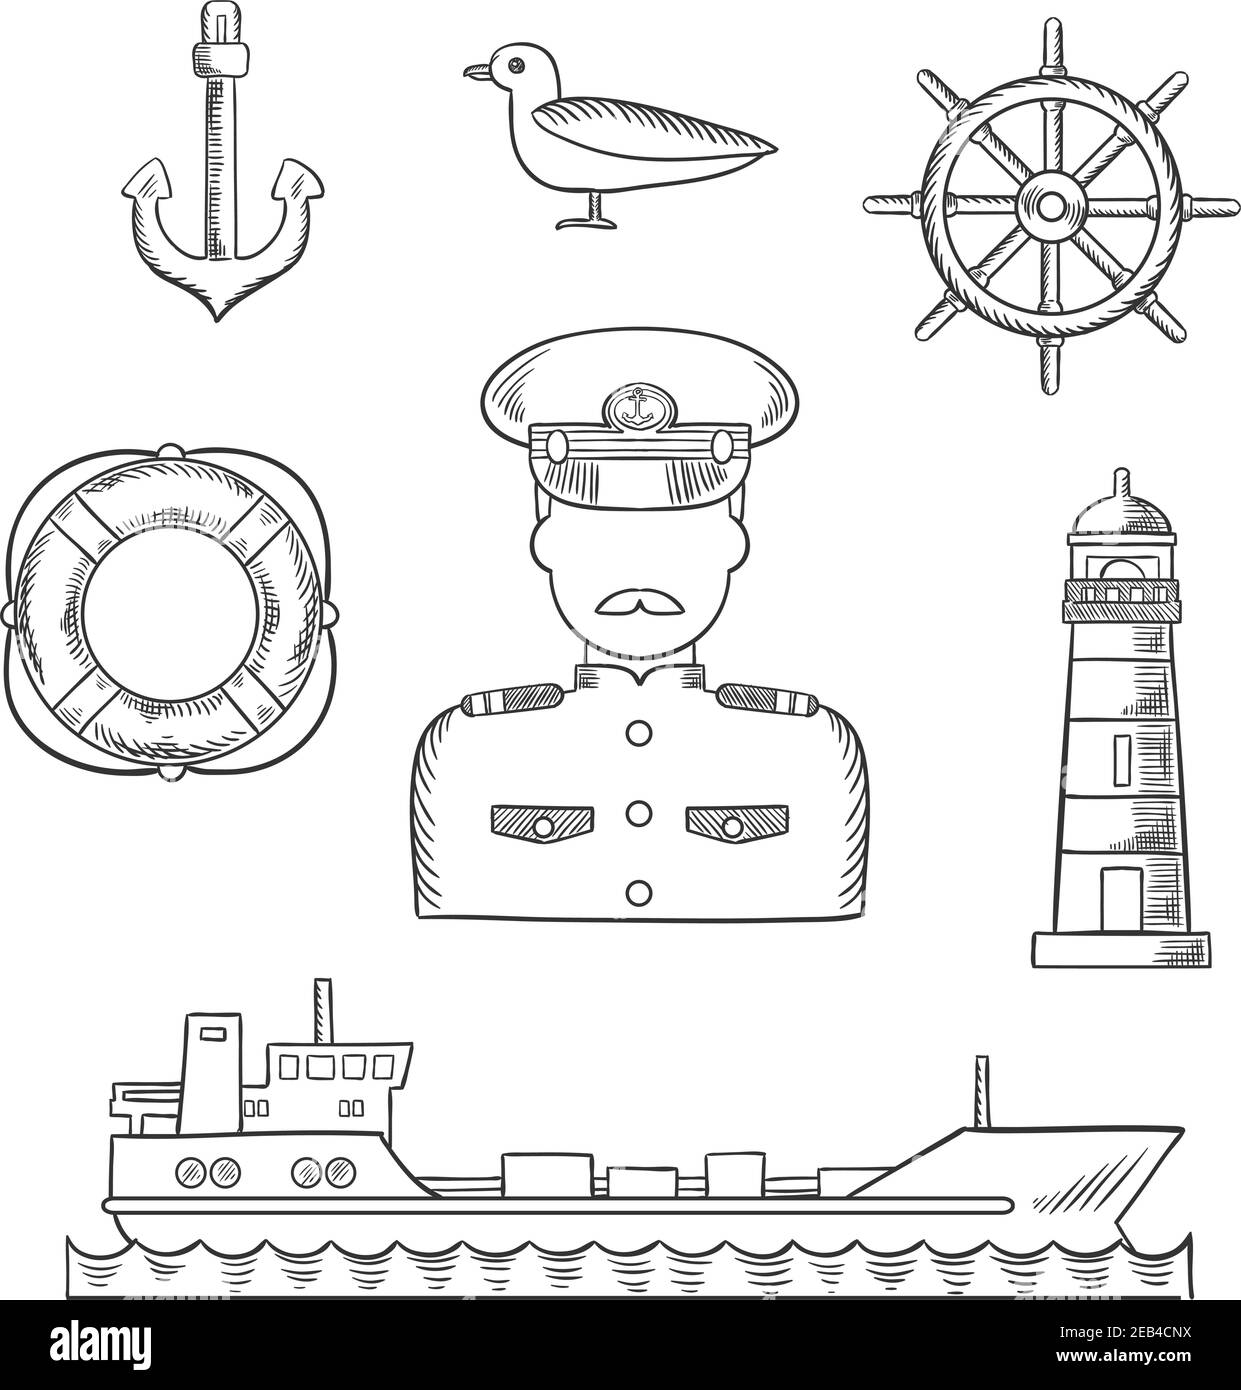 Sailor and captain profession design with moustached captain in white uniform, helm, ship, anchor, lifebuoy, lighthouse and seagull icons. Sketch styl Stock Vector